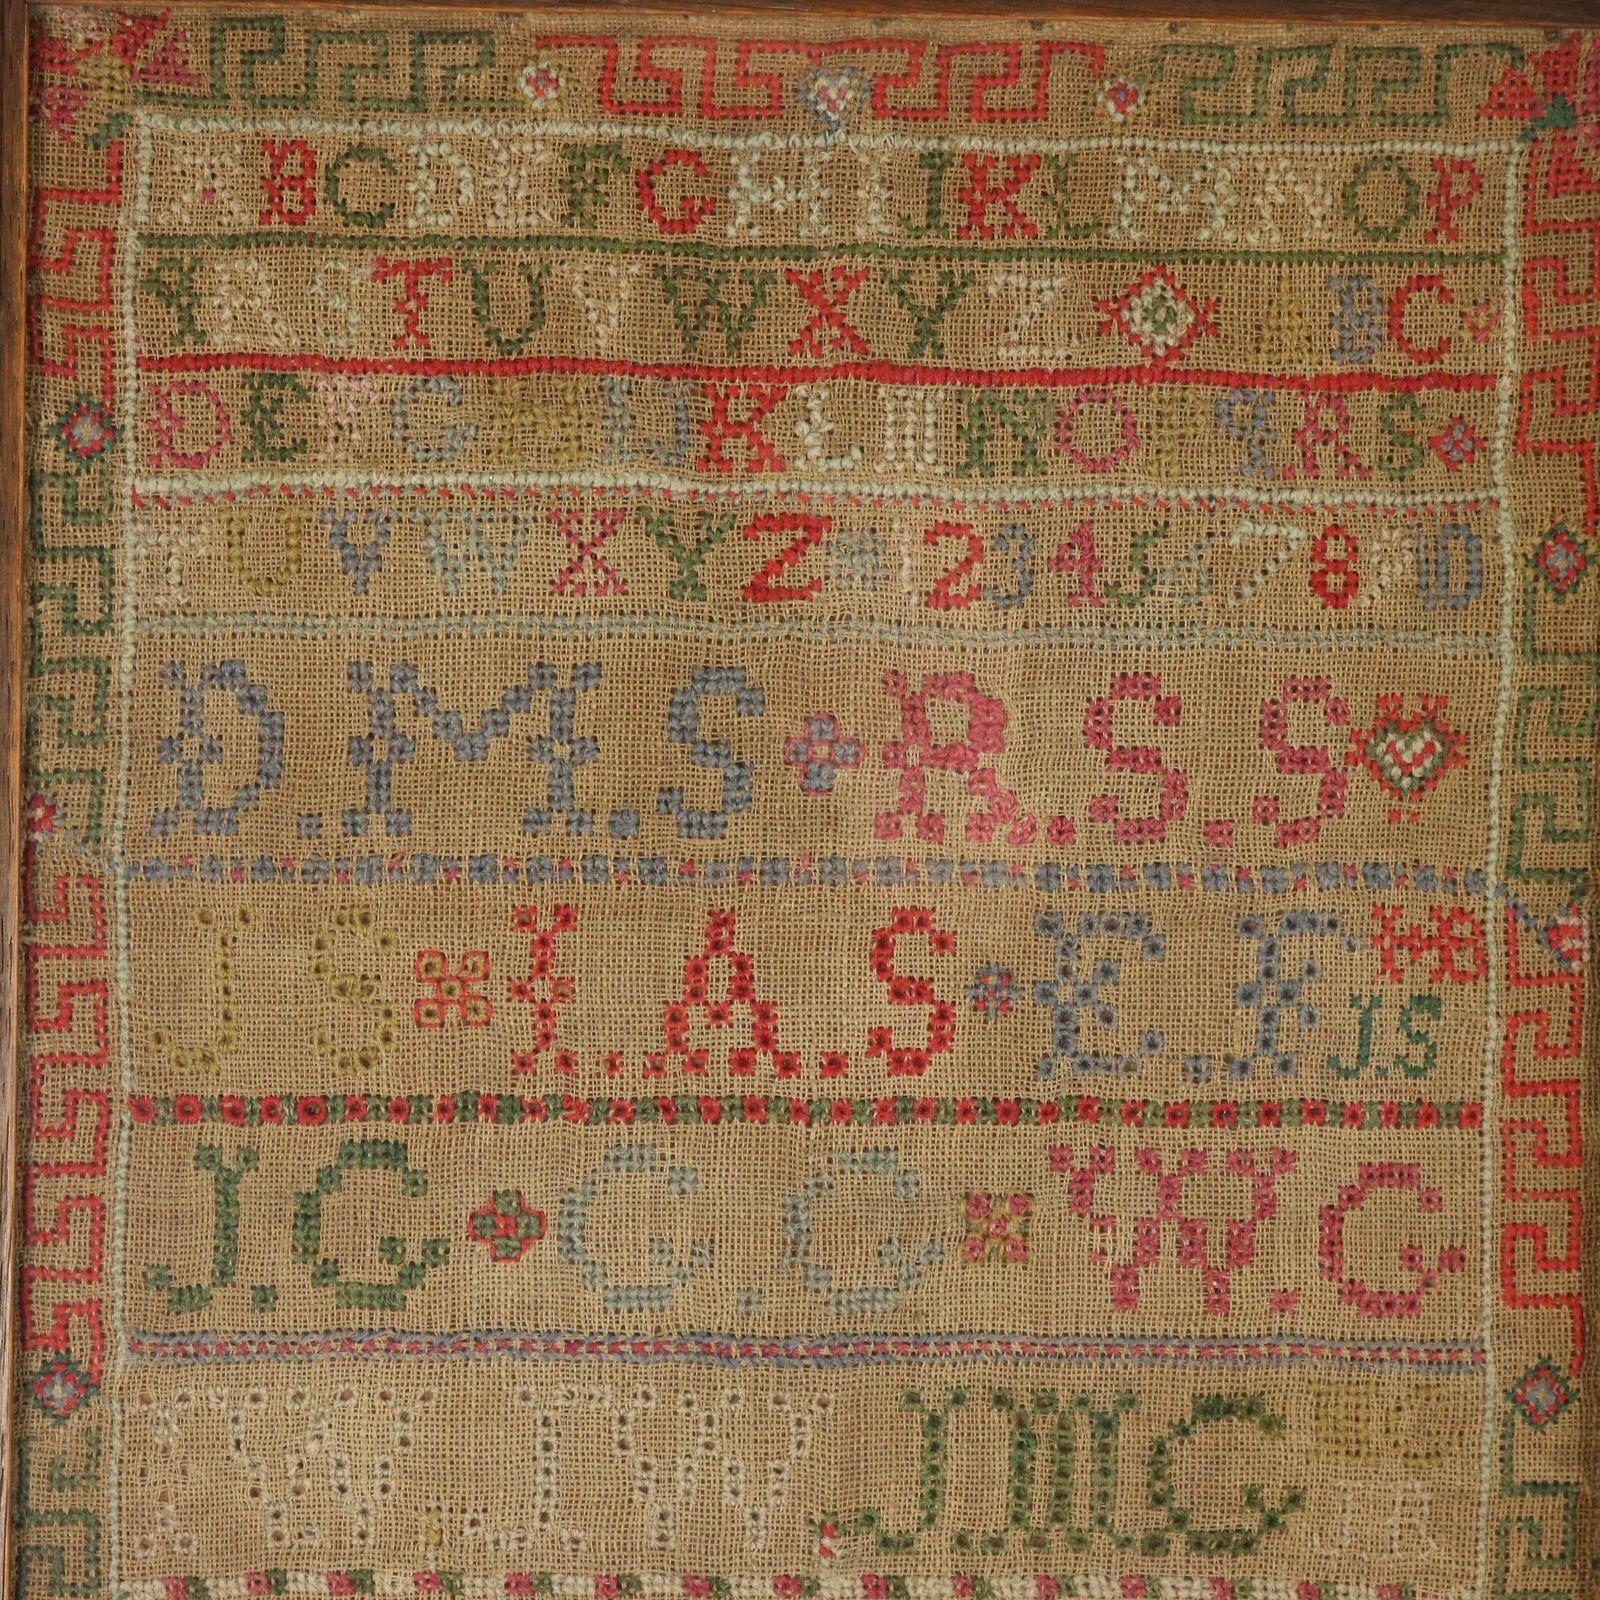 Early 19th century Scottish sampler by Mary Souter. The sampler is worked in wool and silk on a dark homespun linen ground, in cross stitch and Algerian eye. Greek key border. Colours red, yellow, dark brown, white, black, pink, green and blue.